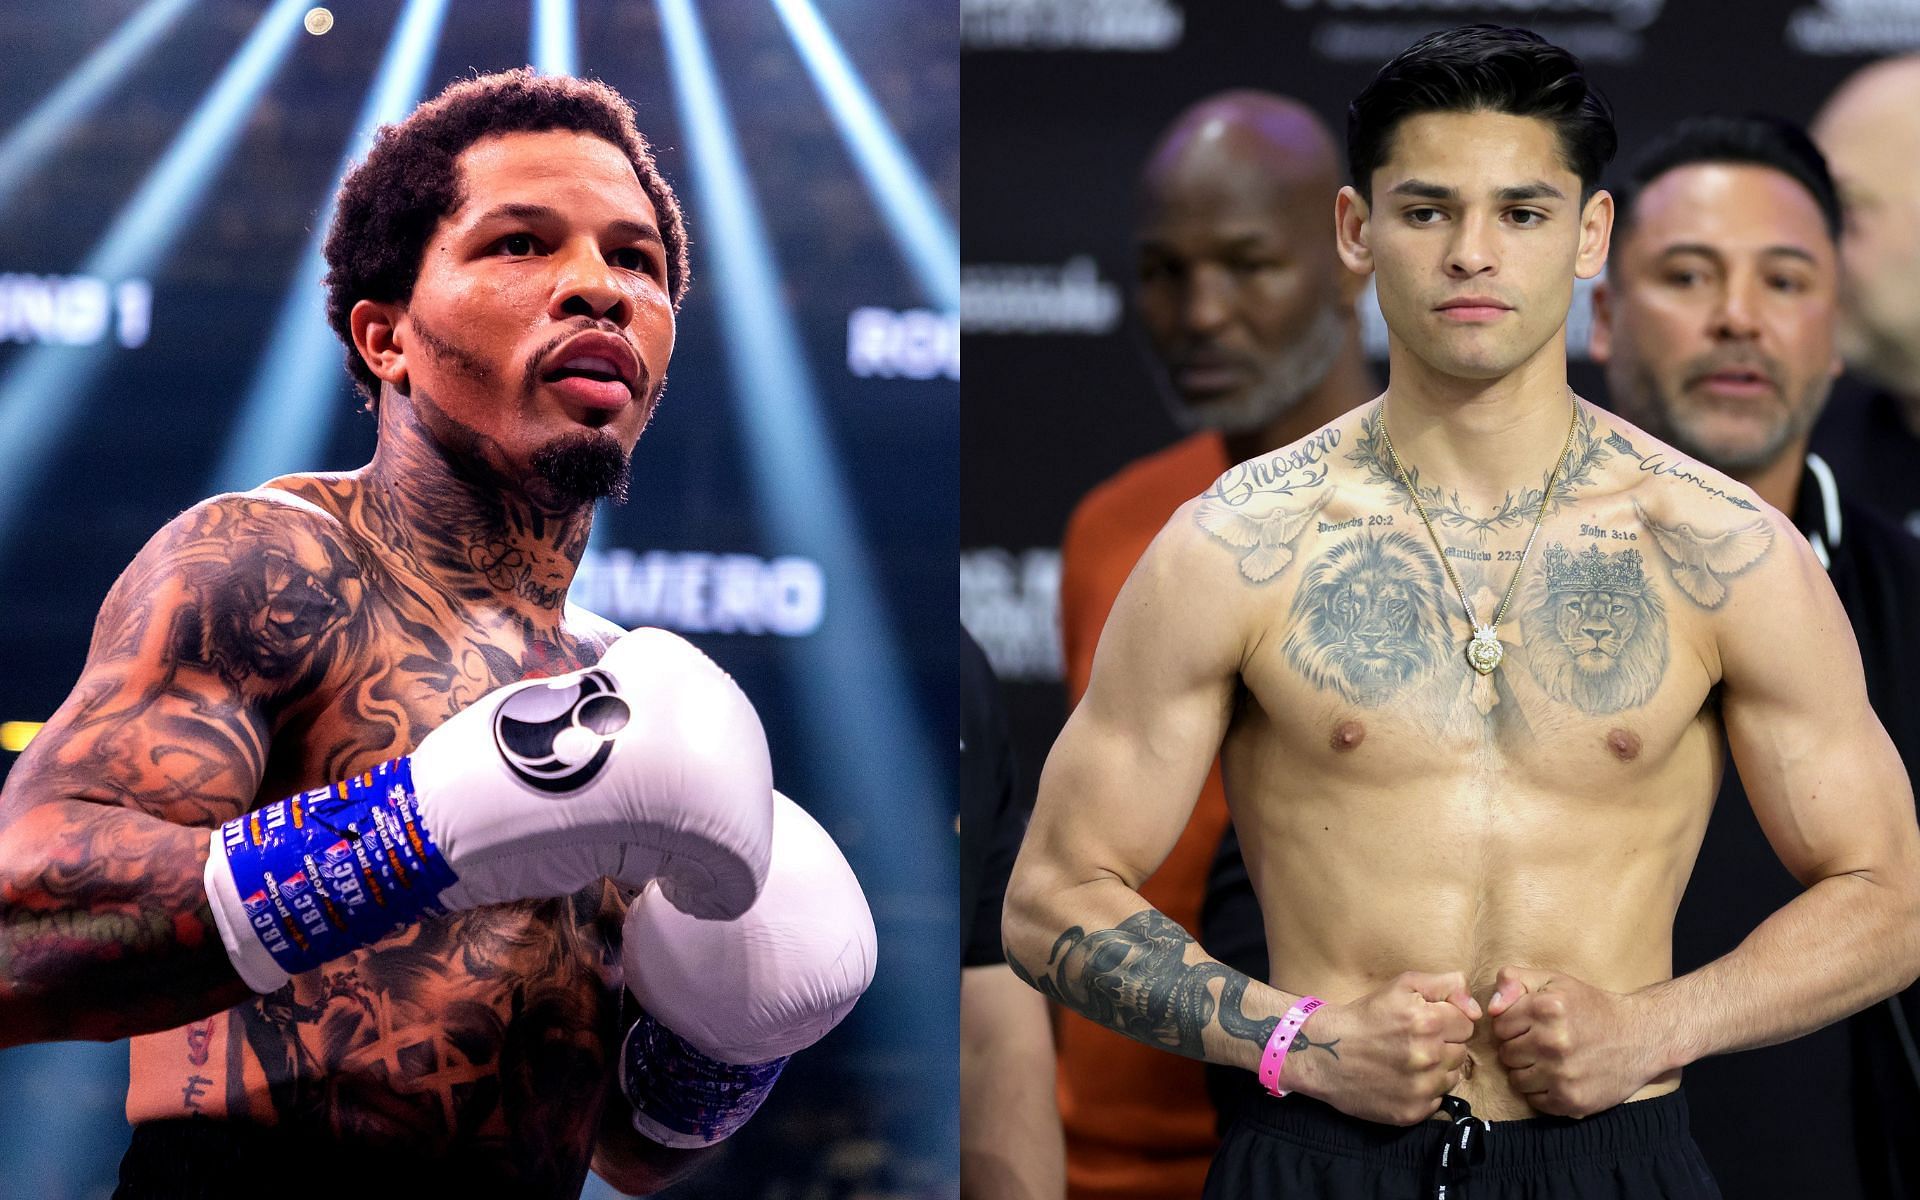 Gervonta Davis (left) and Ryan Garcia (right) (Image credits Getty Images)